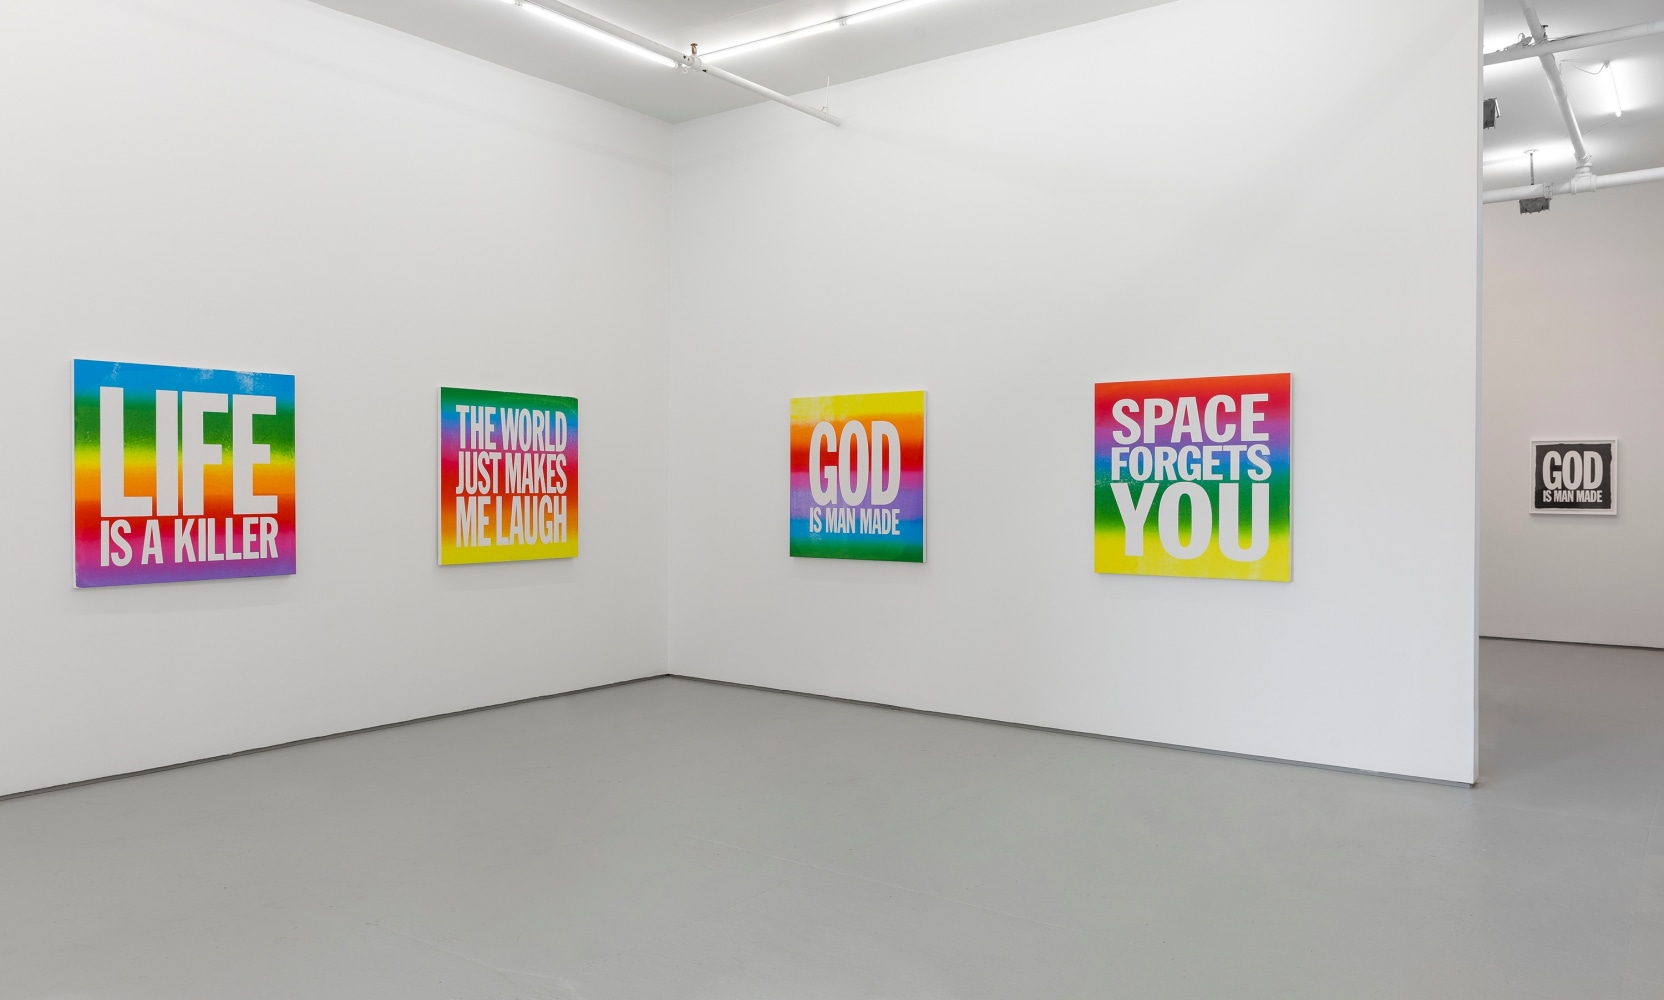 Installation view of Space Forgets You at Elizabeth Dee Gallery, 2015